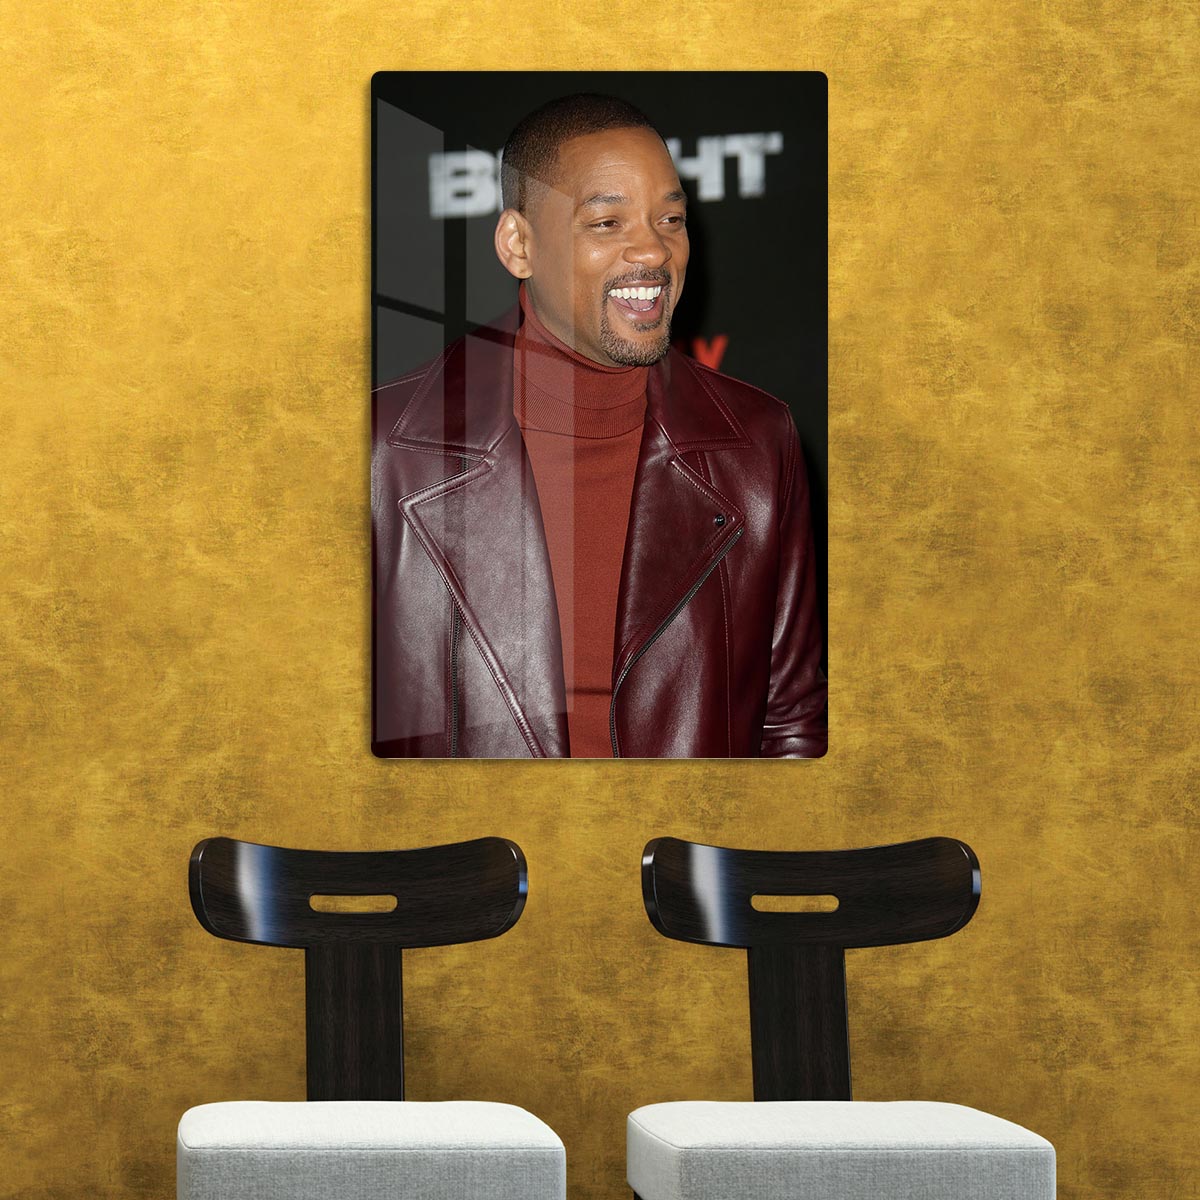 Will Smith in brown HD Metal Print